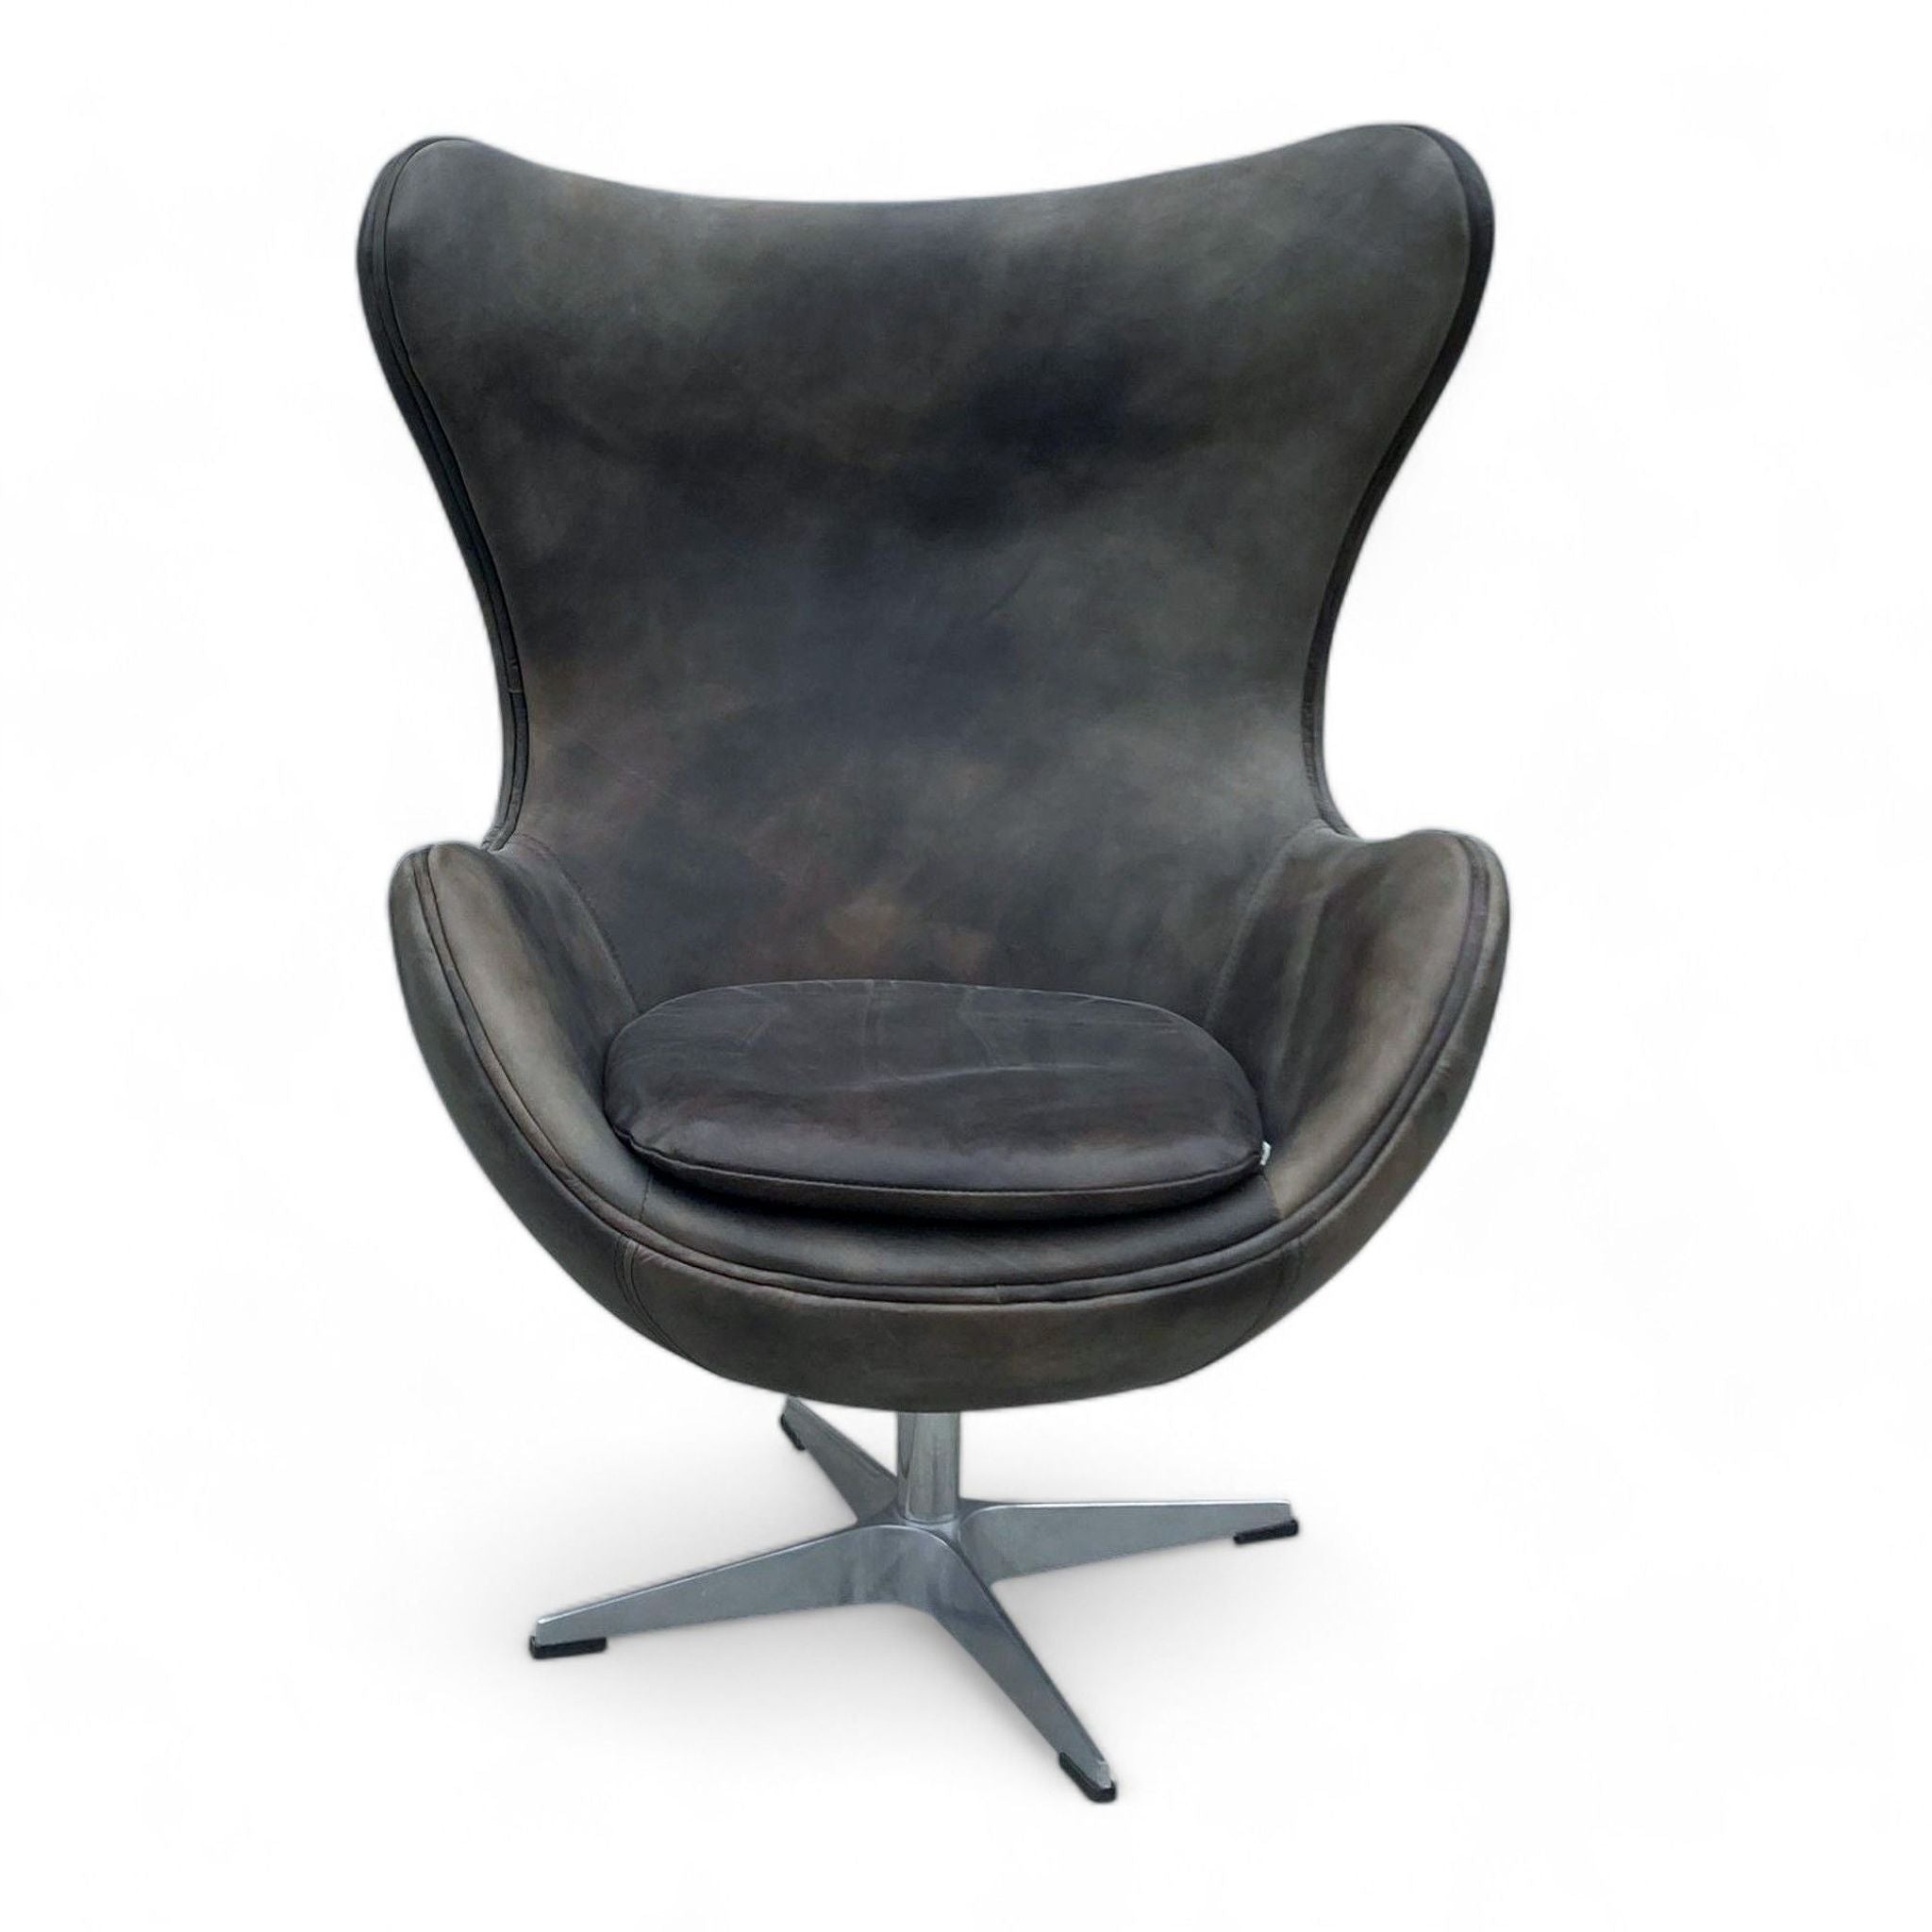 Sleek modern lounge chair by Restoration Hardware, featuring leather upholstery and a metal swivel base.